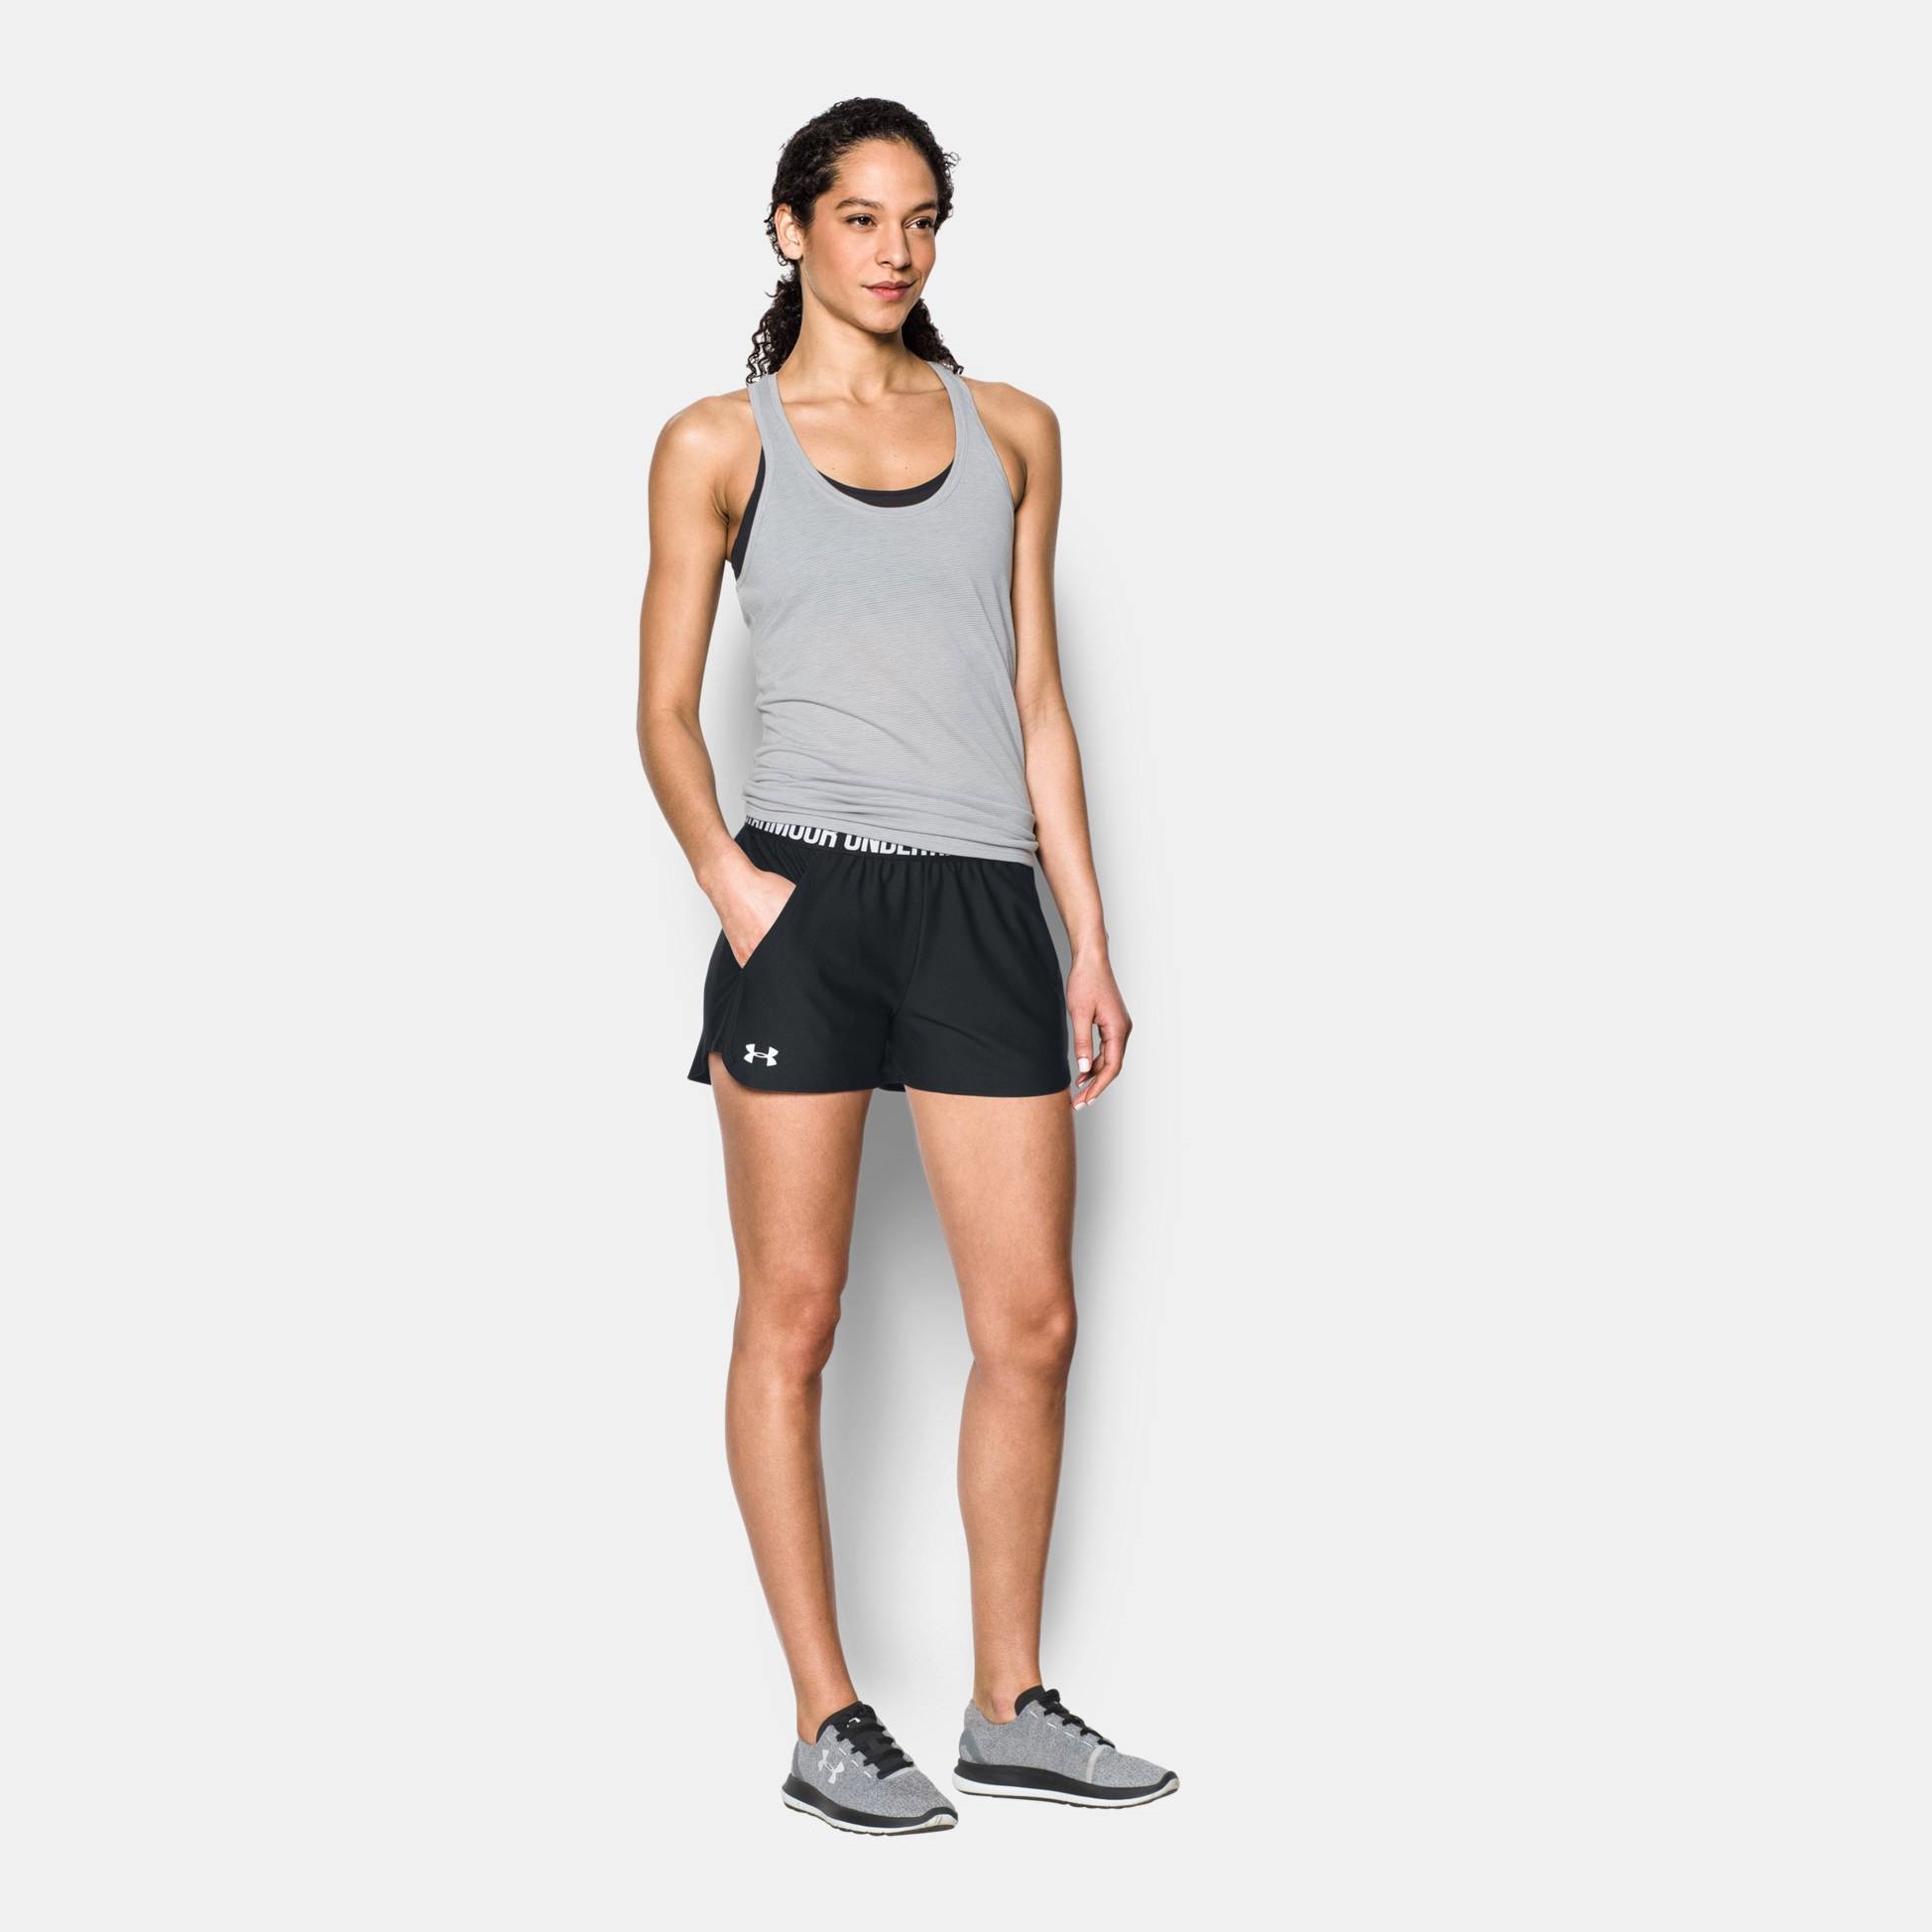 Shorts -  under armour Play Up 2.0 Shorts 2231